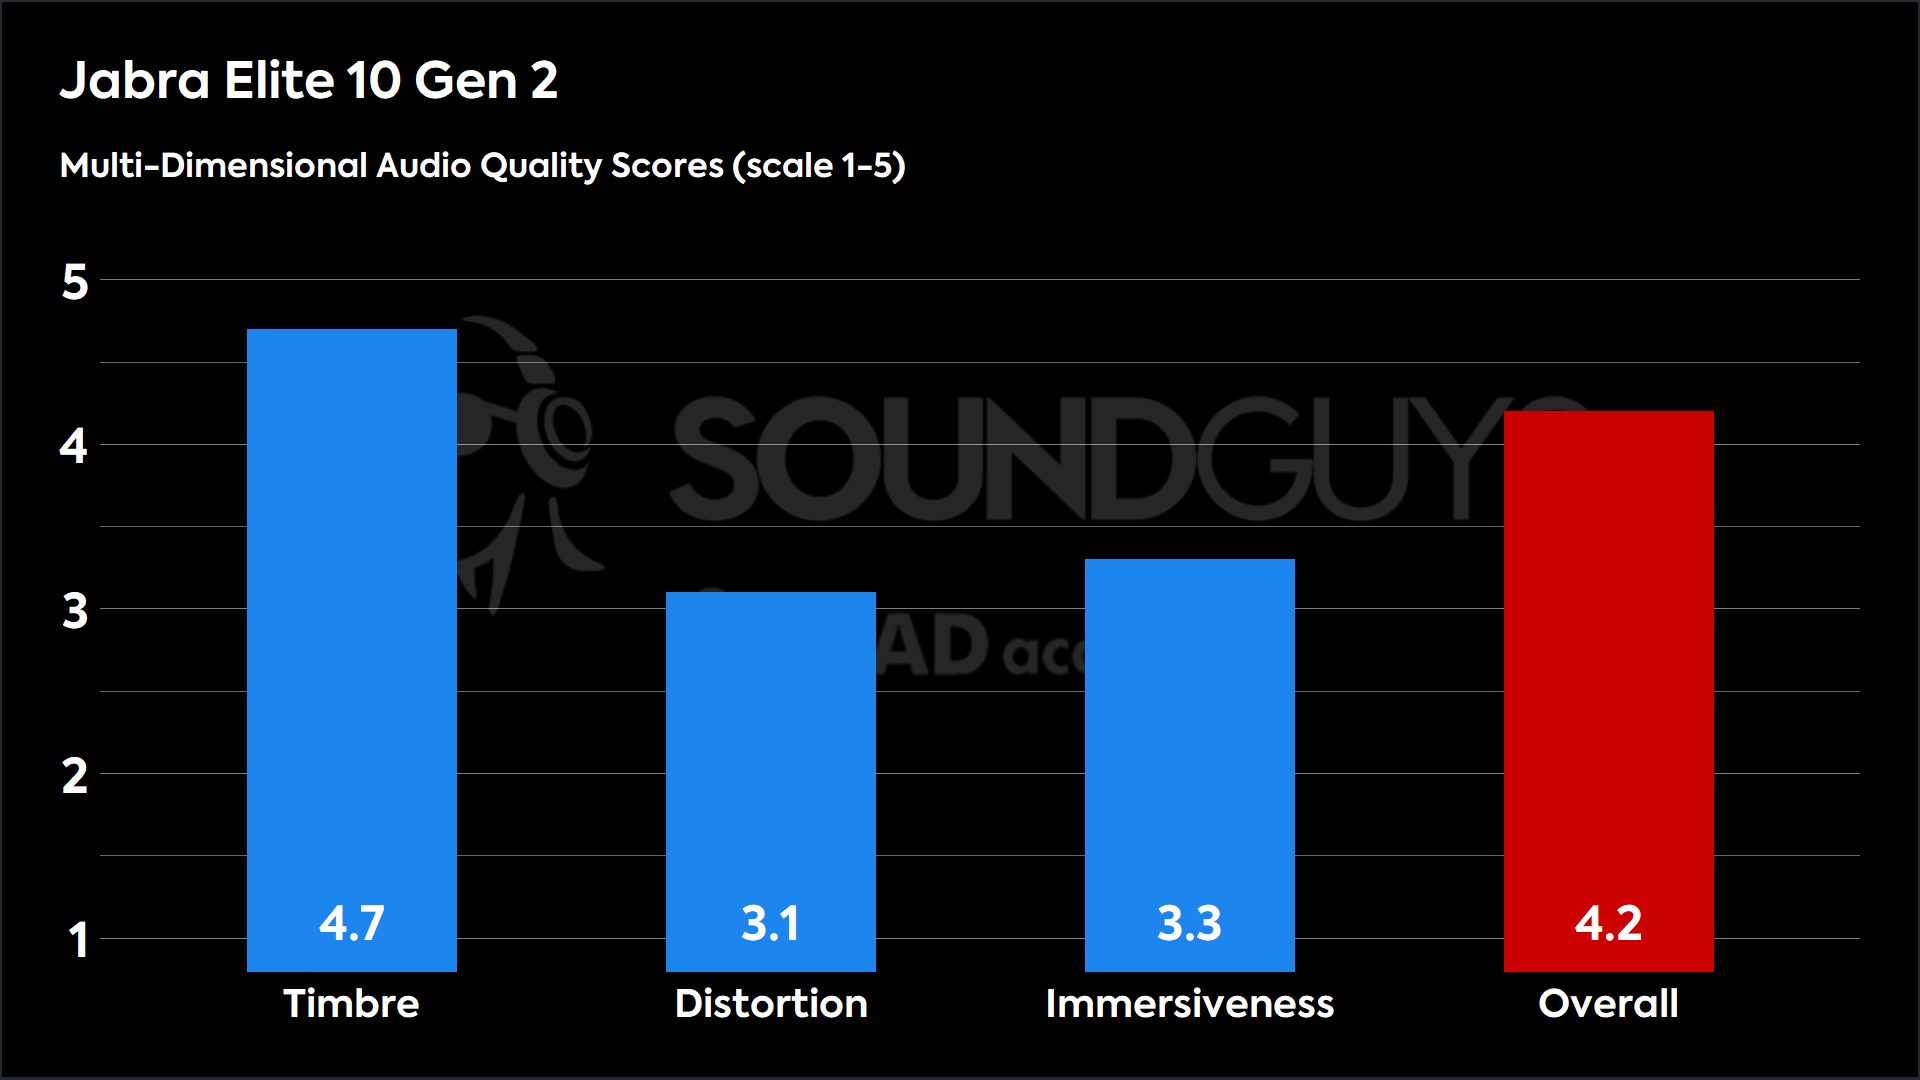 This chart shows the MDAQS results for the Jabra Elite 10 Gen 2 in Default mode. The Timbre score is 4.7, The Distortion score is 3.1, the Immersiveness score is 3.3, and the Overall Score is 4.2).